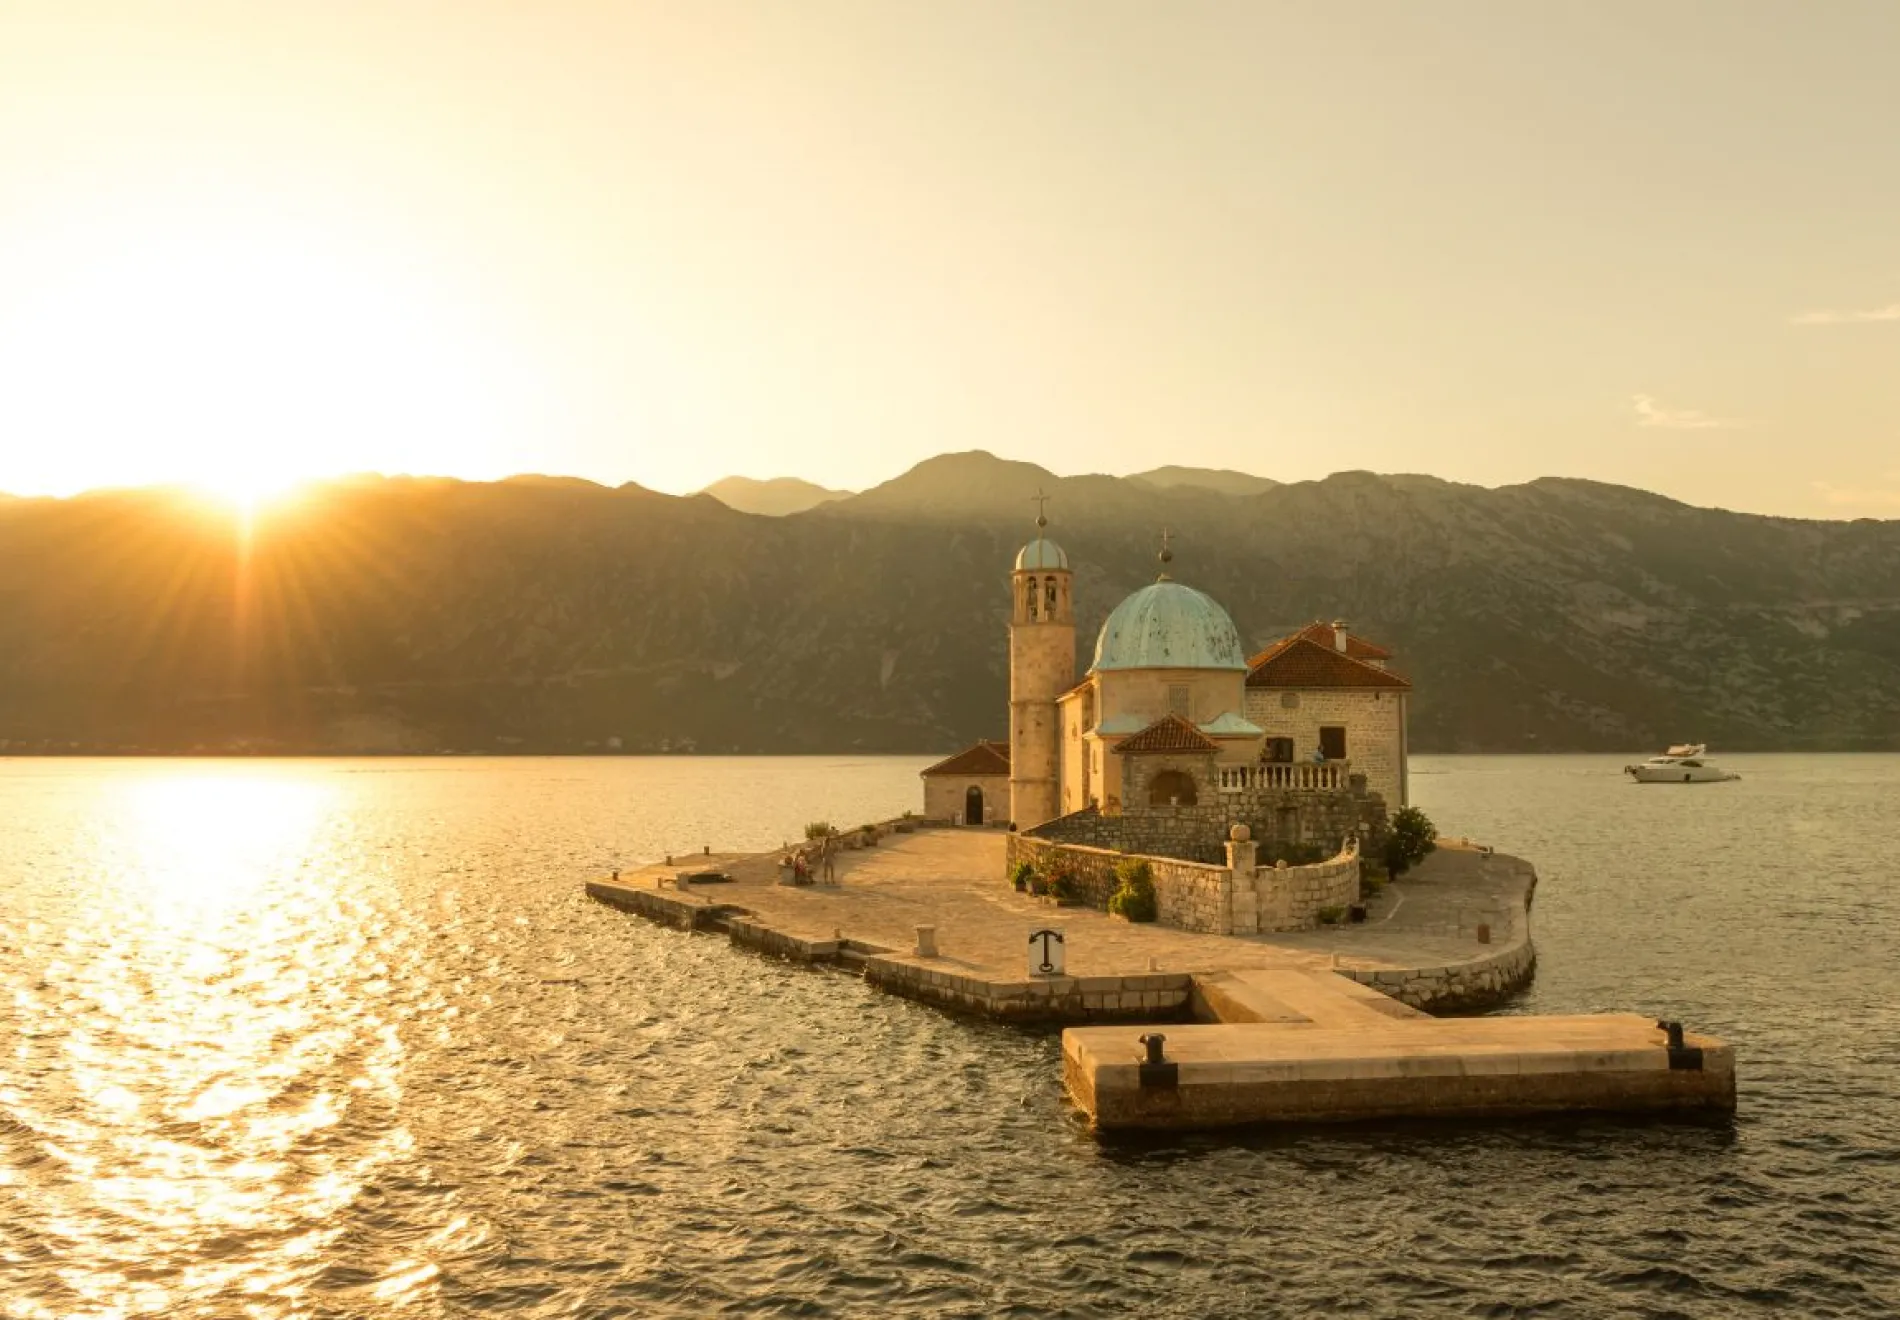 Our-Lady-of-the-Reef-Island-Church-near-Perast-in-the-Bay-of-Kotor-Montenegro.jpg